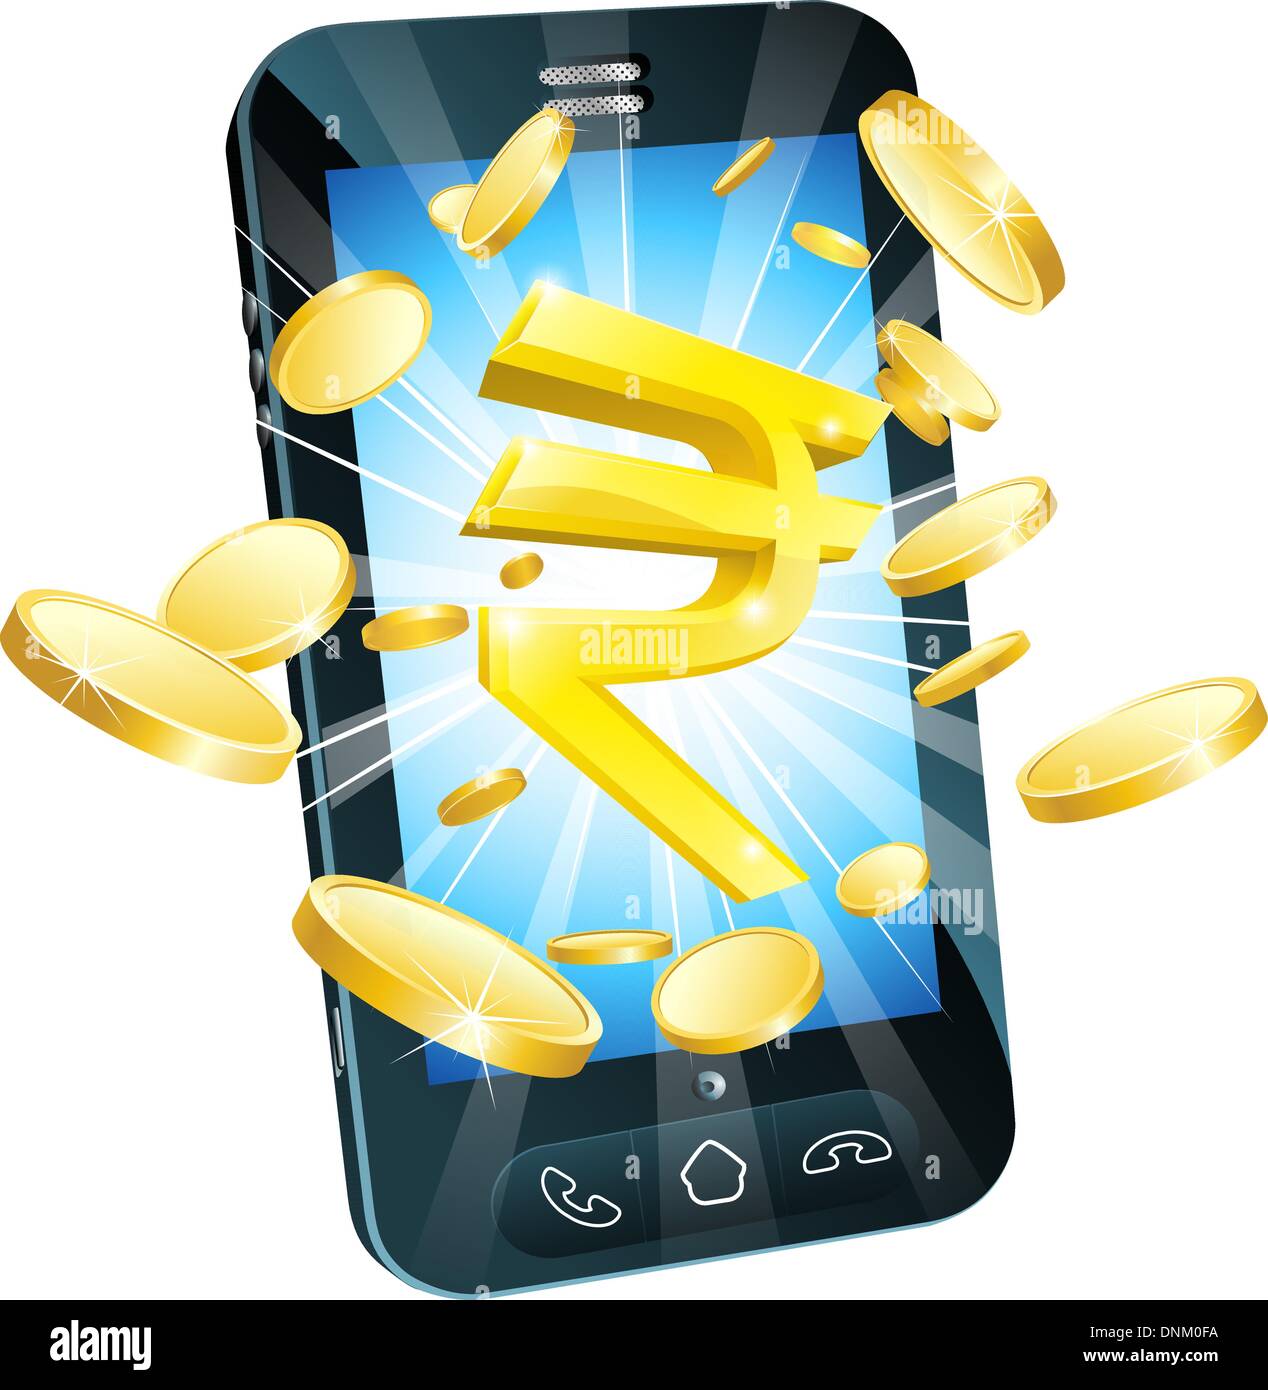 Rupee money phone concept illustration of mobile cell phone with gold Rupee sign and coins Stock Vector